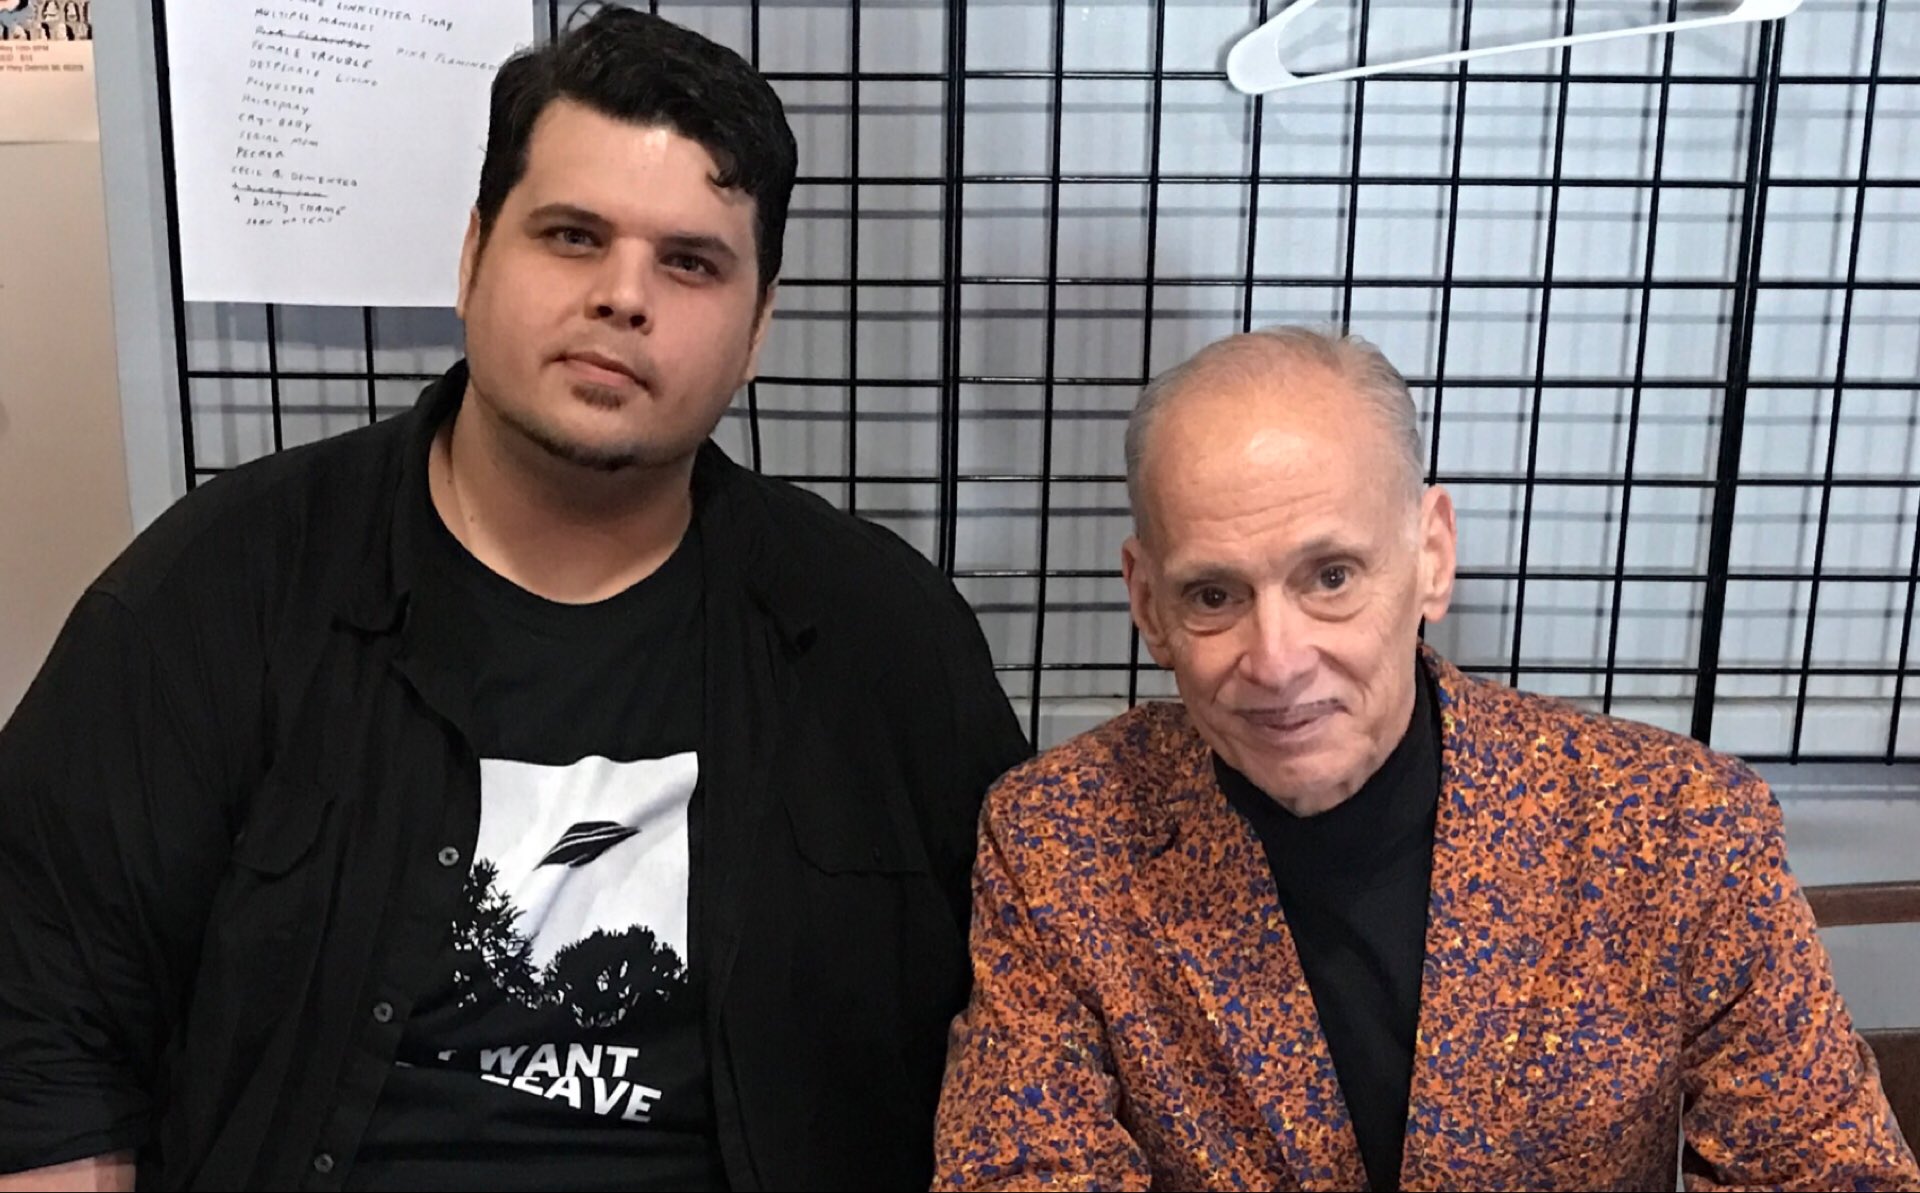 Had an AMAZING time at the Detroit John Waters show, it was total bucket list stuff. Happy Birthday John! 